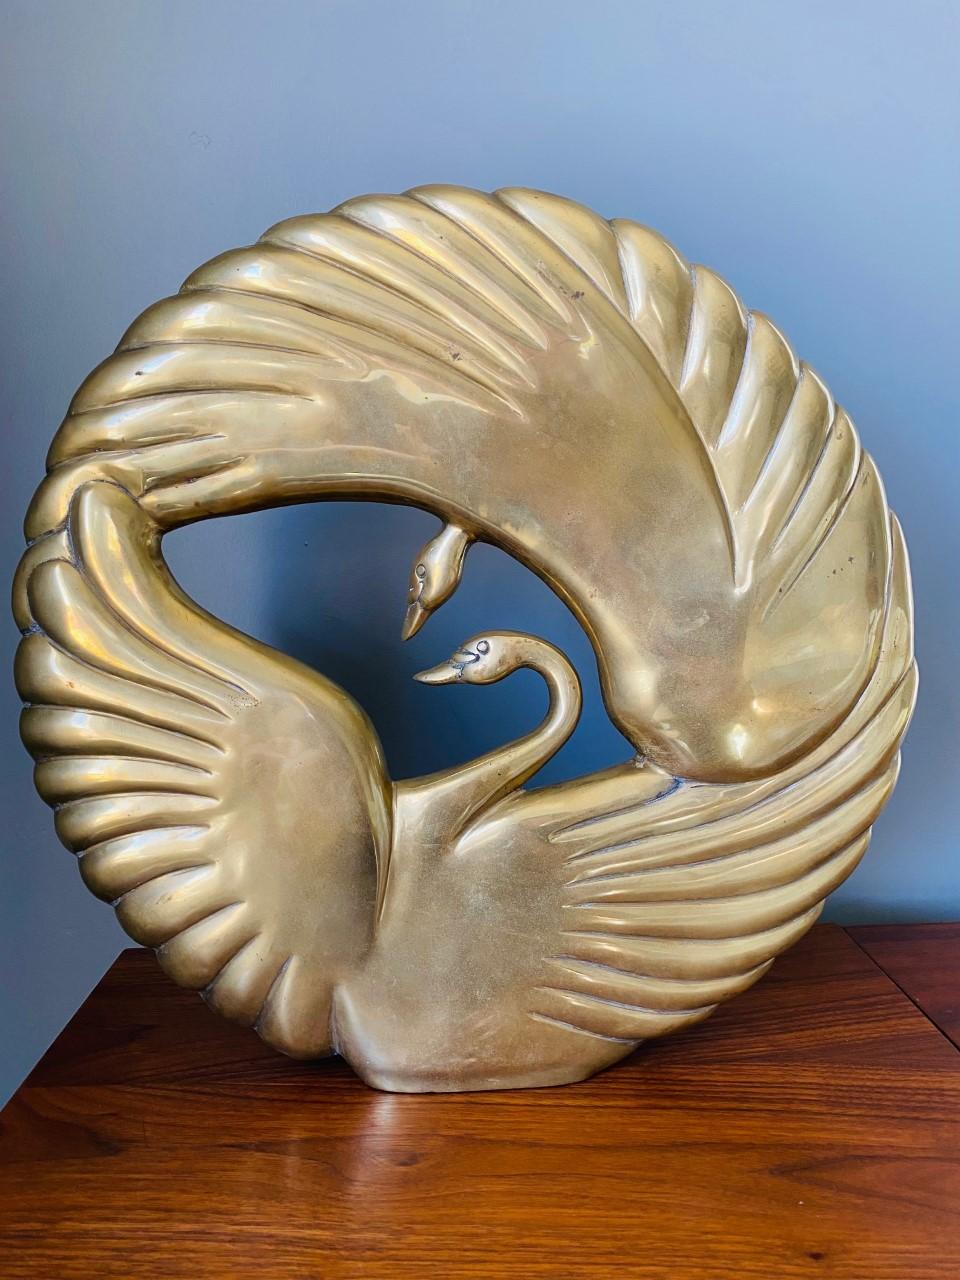 Incredibly beautiful art deco style sculpture with two swans interlocking in a circle.  This piece is attributed to Dolbi Cashier and is impactful, glamourous and chic.  The piece presents itself in a substantial size and the round shape brings